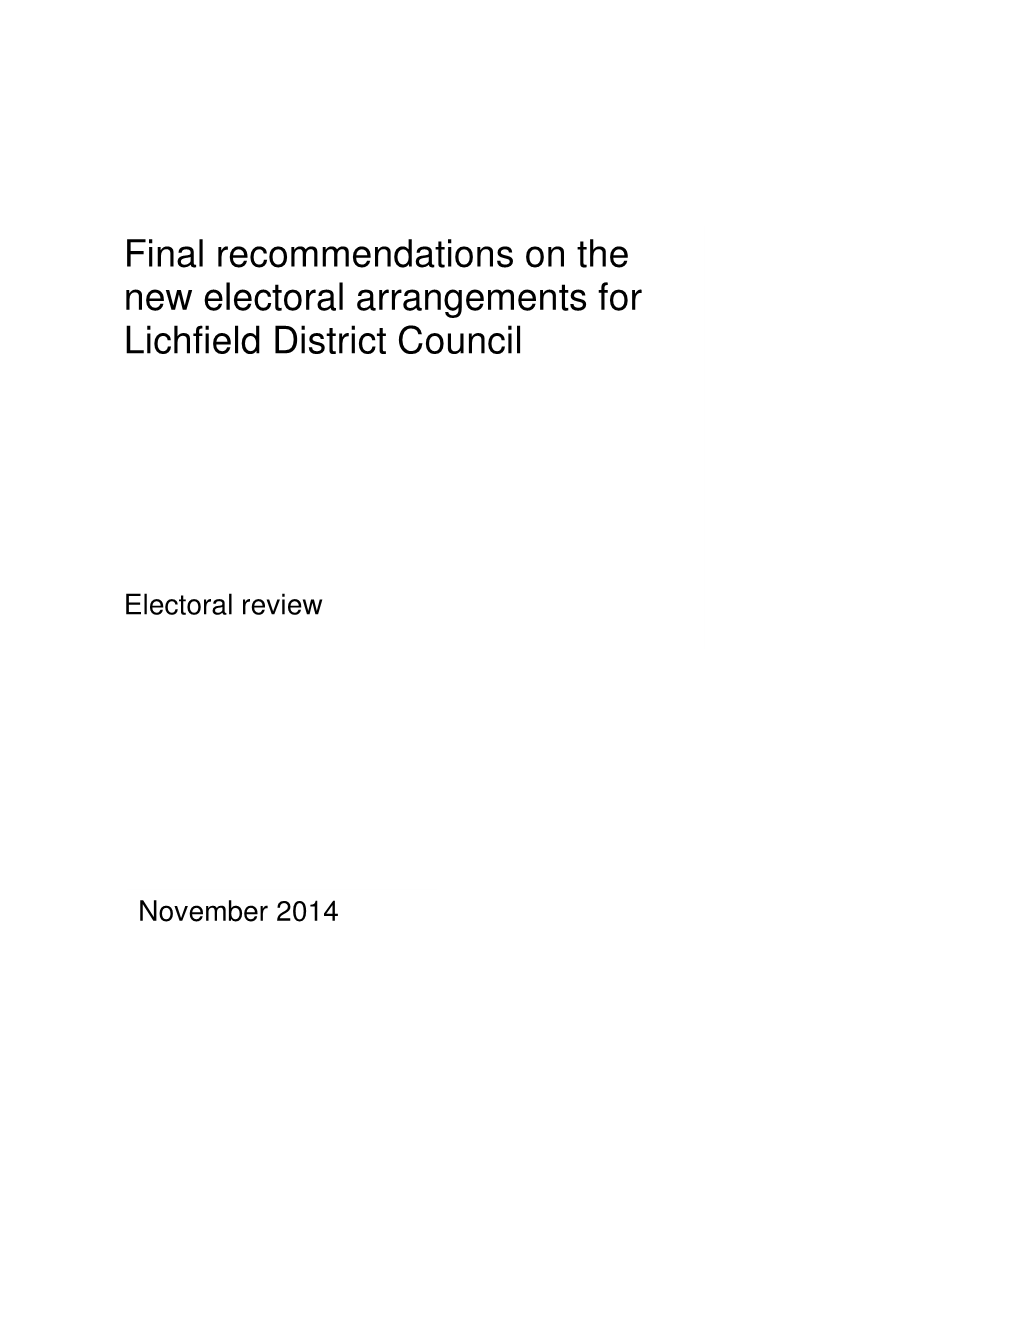 Final Recommendations on the New Electoral Arrangements for Lichfield District Council